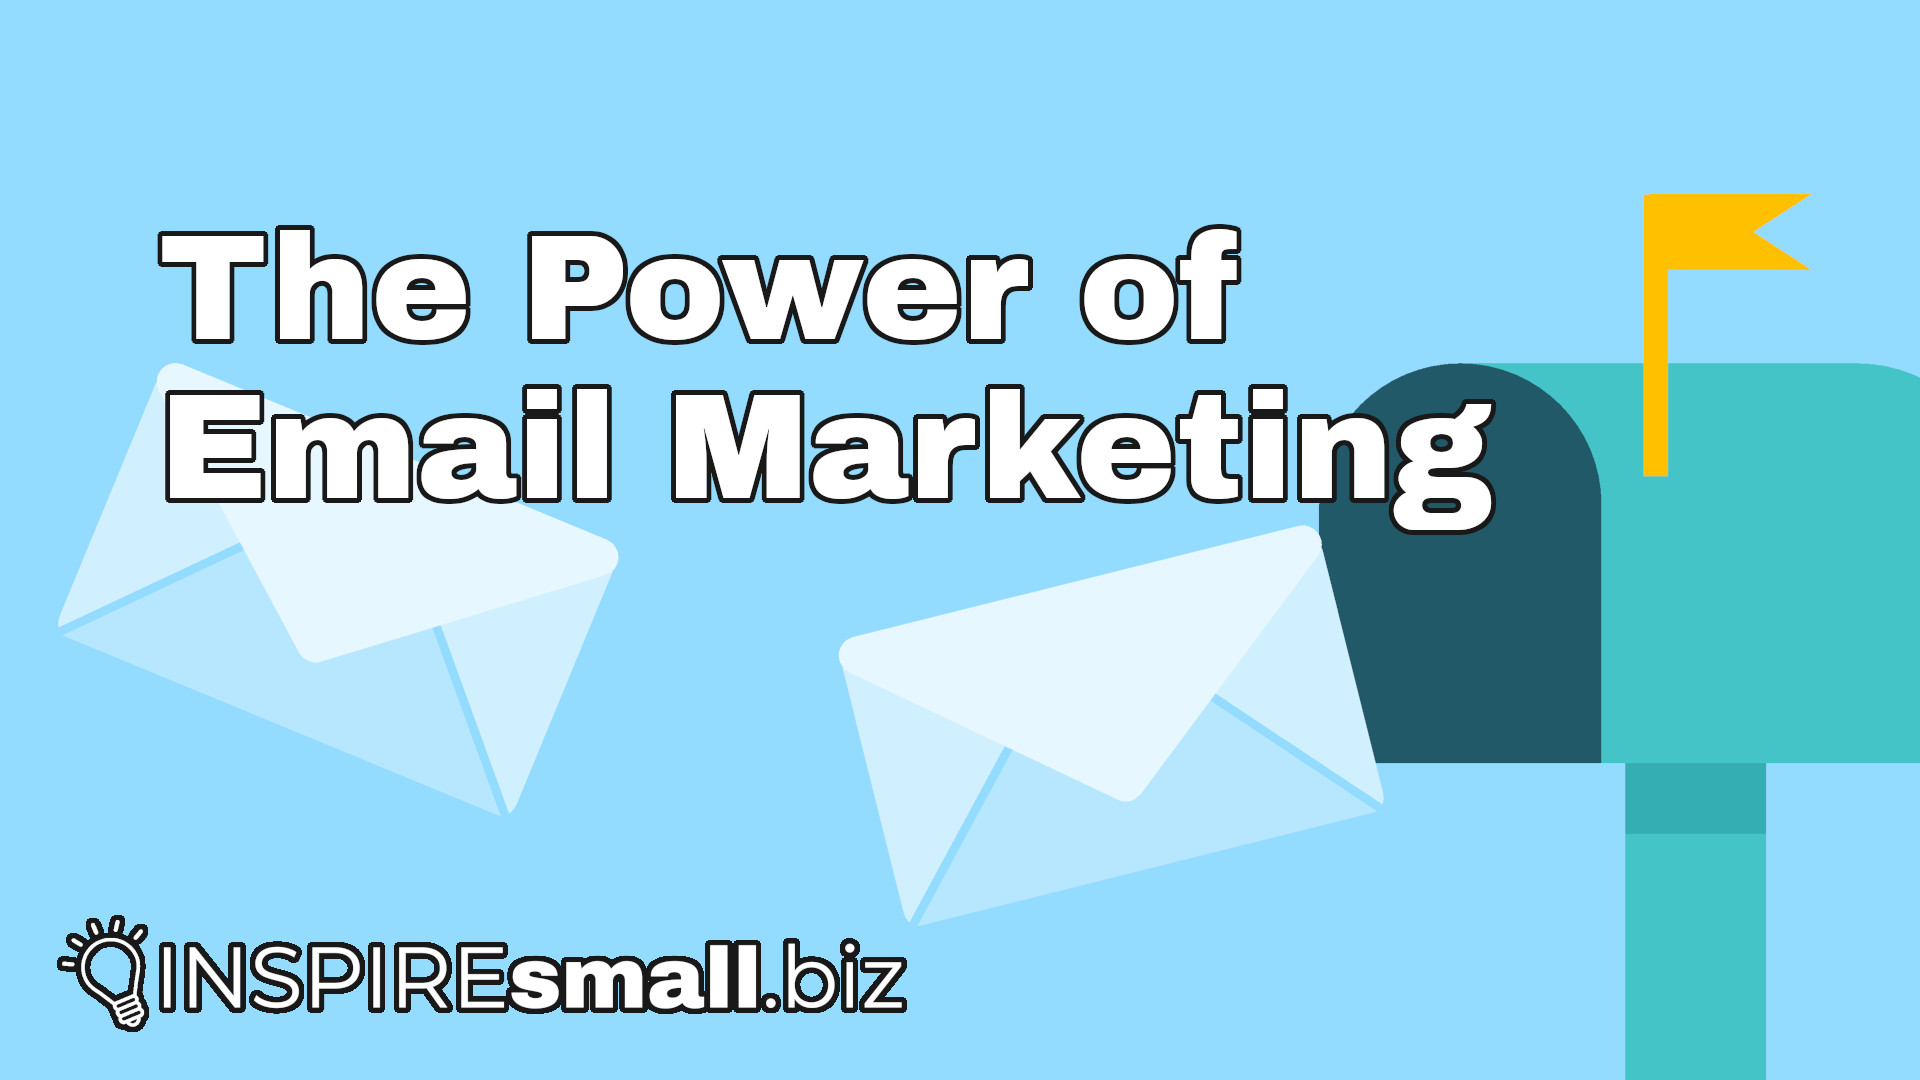 The Power of Email Marketing from INSPIREsmall.biz over a blue background with a teal mailbox and yellow mailbox flag, and light teal letters flying towards it.